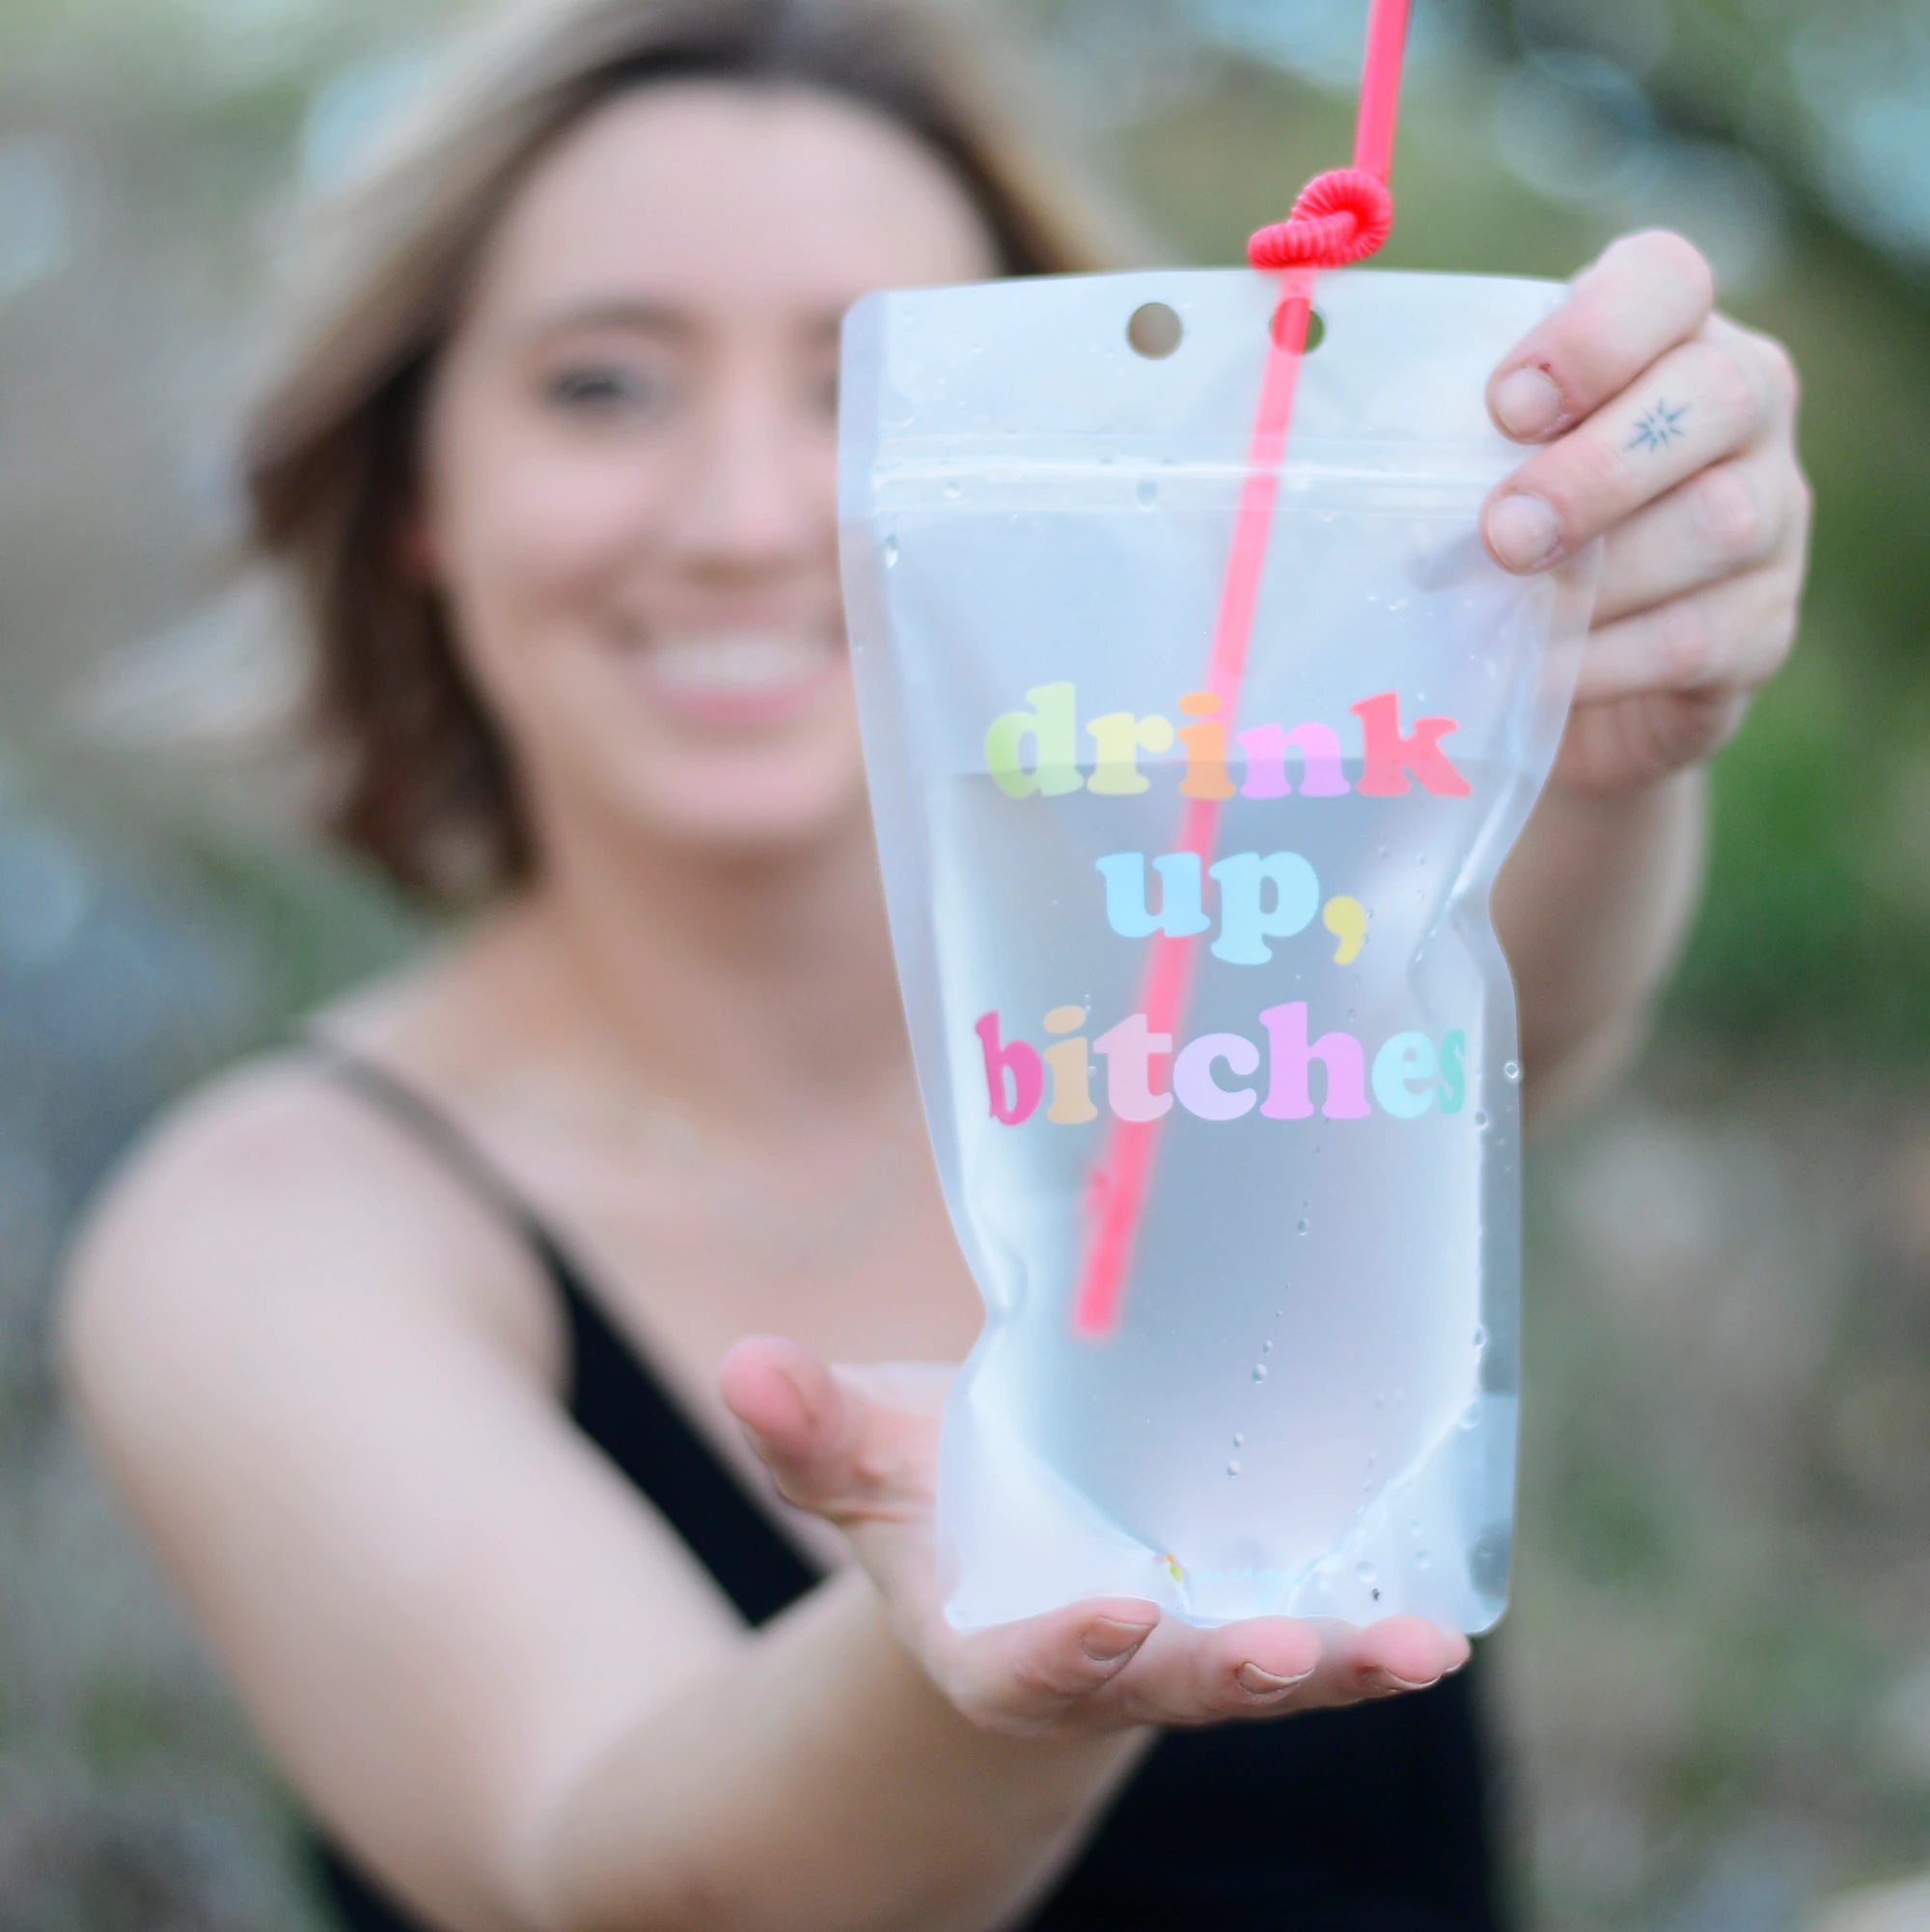 Summer Drink Pouches with Straws Beach Drink Pouches for Adult Translucent  Party Beverage Bags Stand up Juice Pouches Plastic Drink Container with